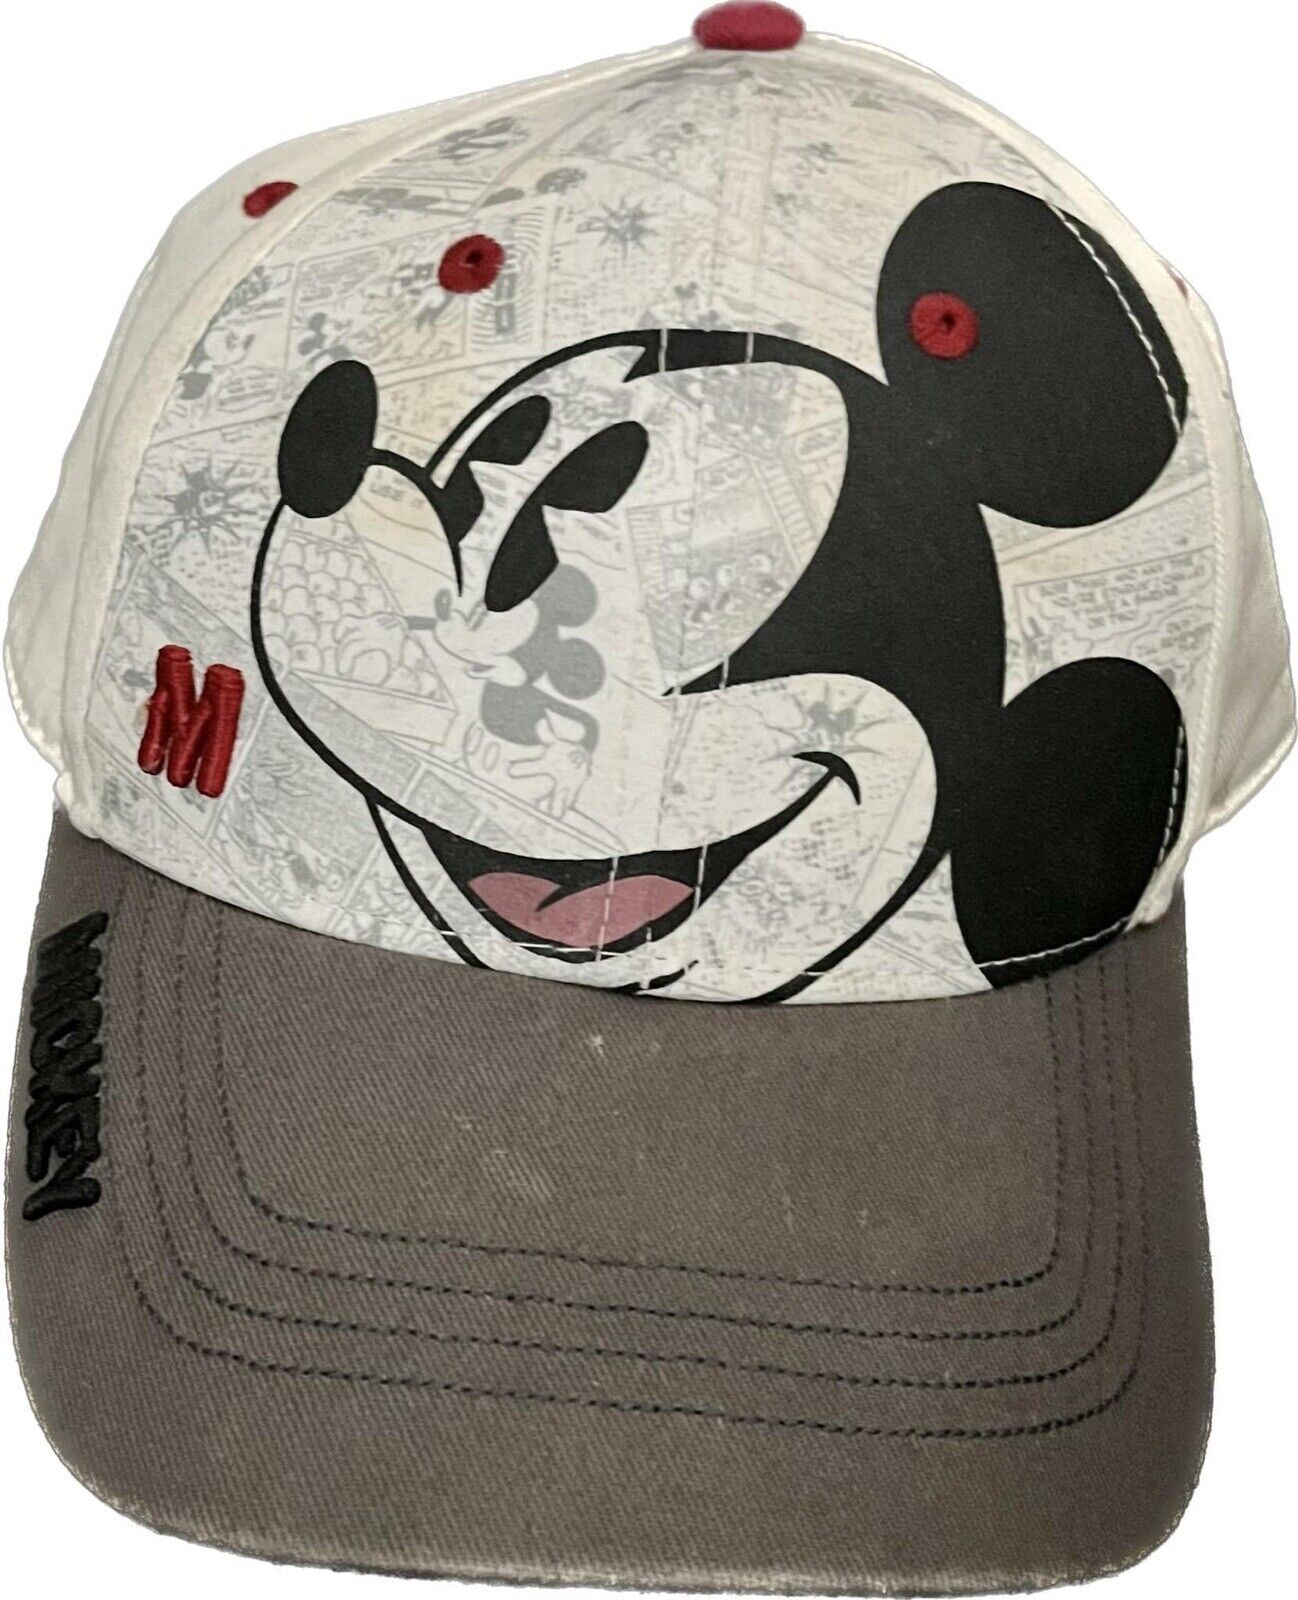 Disney Kids Small Adjustable White Mickey Mouse Hat